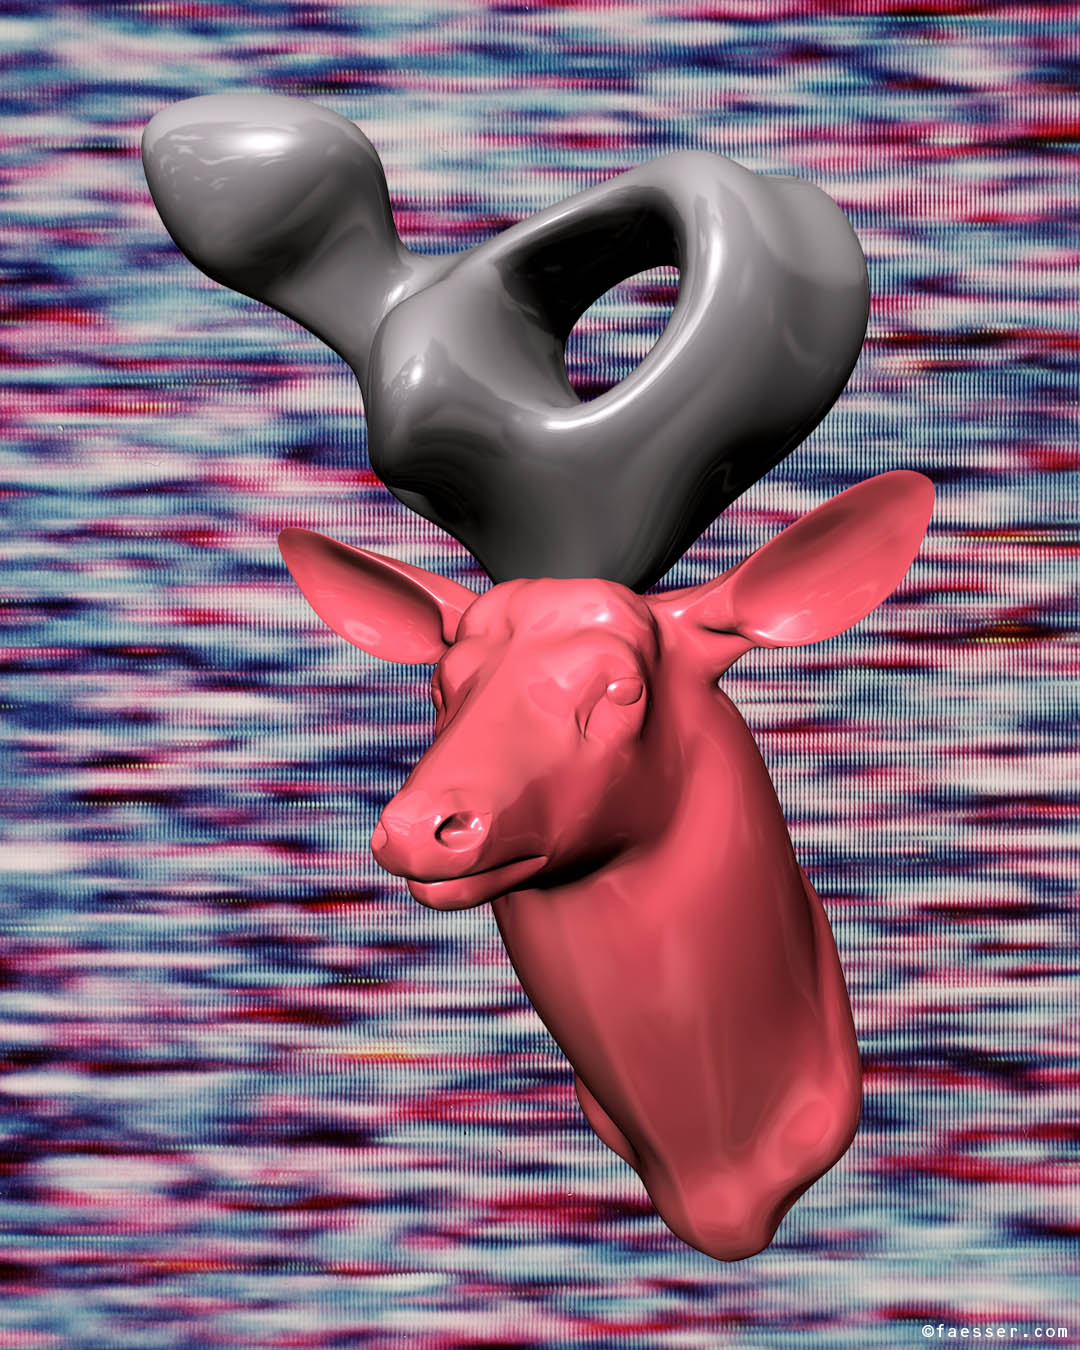 Tribute to Hans Arp: pink deer trophy with abstract sculpture as antlers; work of art as figurative sculpture; artist Roland Faesser, sculptor and painter 2017